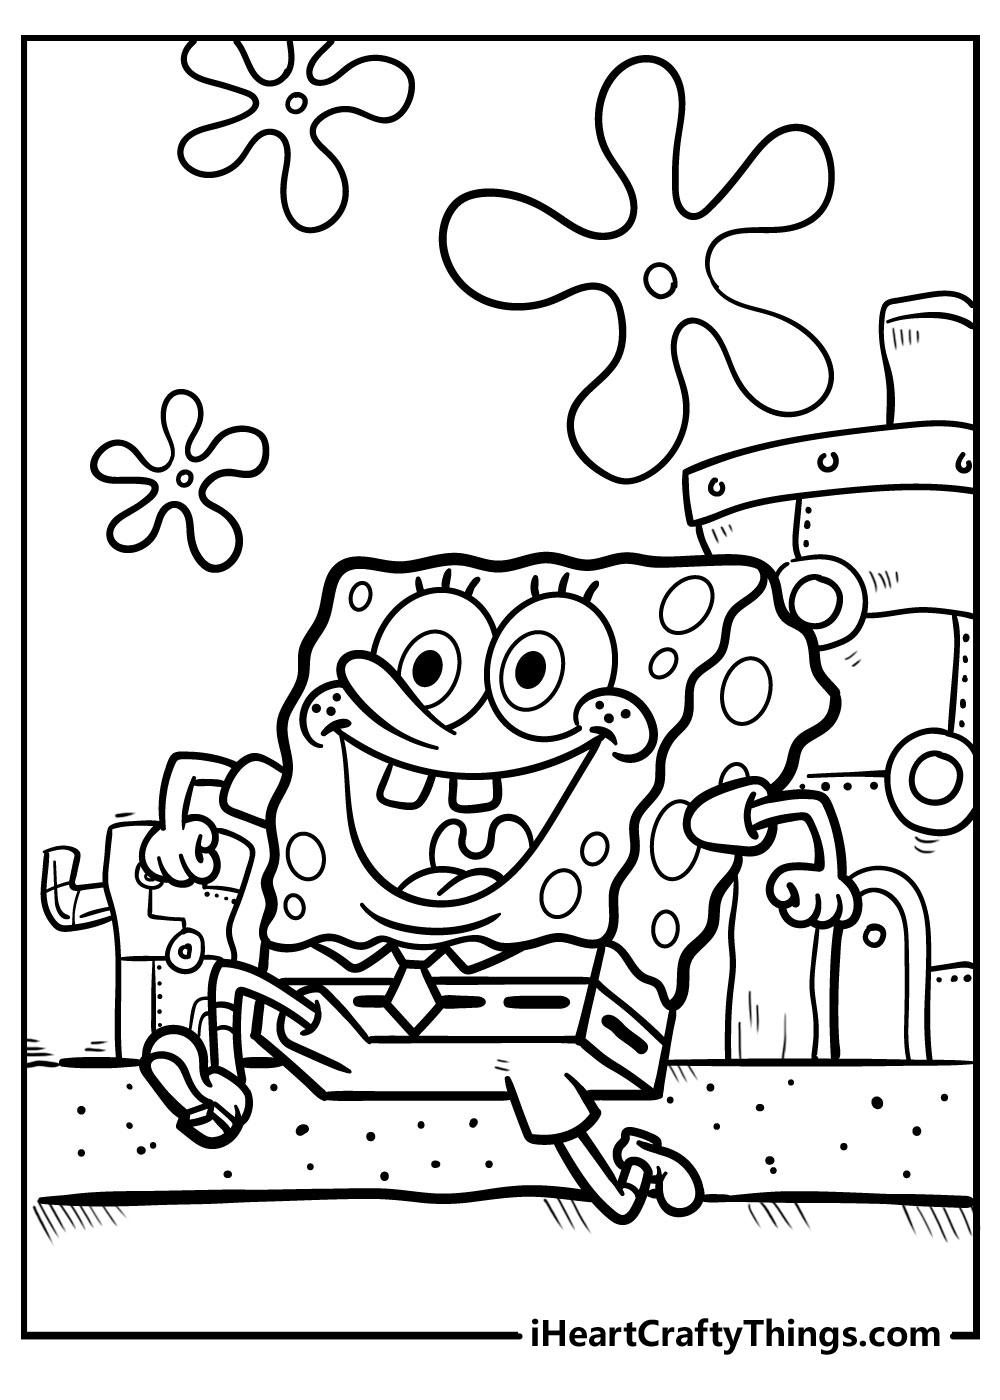 Super fun spongebob coloring pages updated